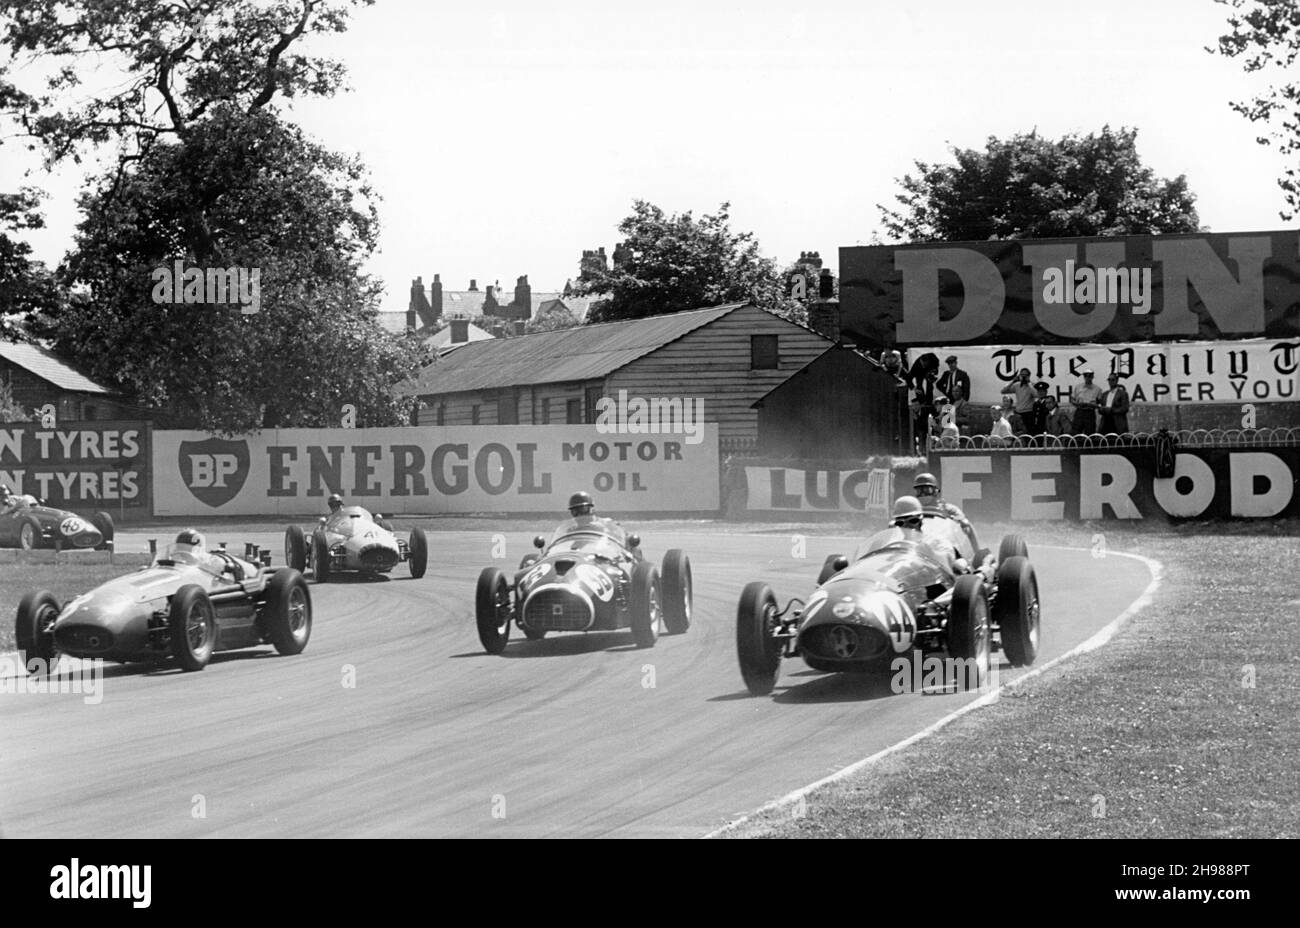 British Grand Prix, Aintree, Merseyside, 1955. Tony Rolt in a Connaught (36), and the Maserati of Roy Salvadori (44). Neither car finished the race. Stock Photo